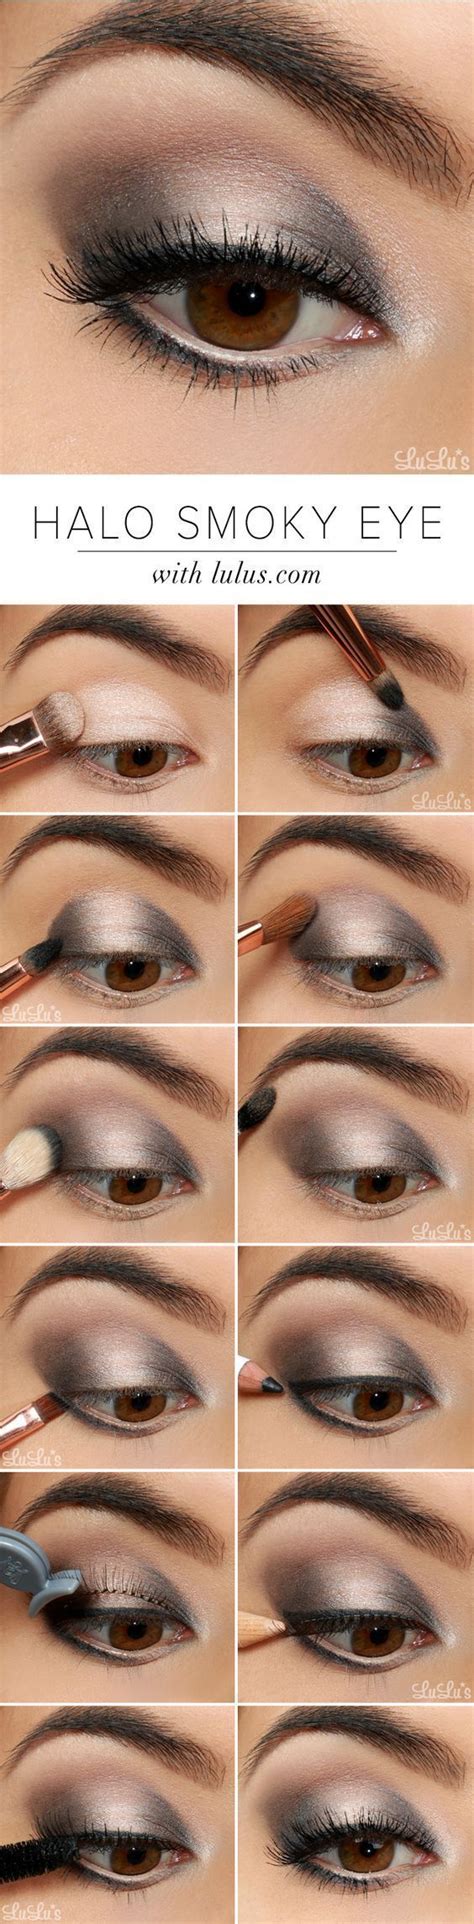 20 Easy Step By Step Eyeshadow Tutorials For Beginners With Images